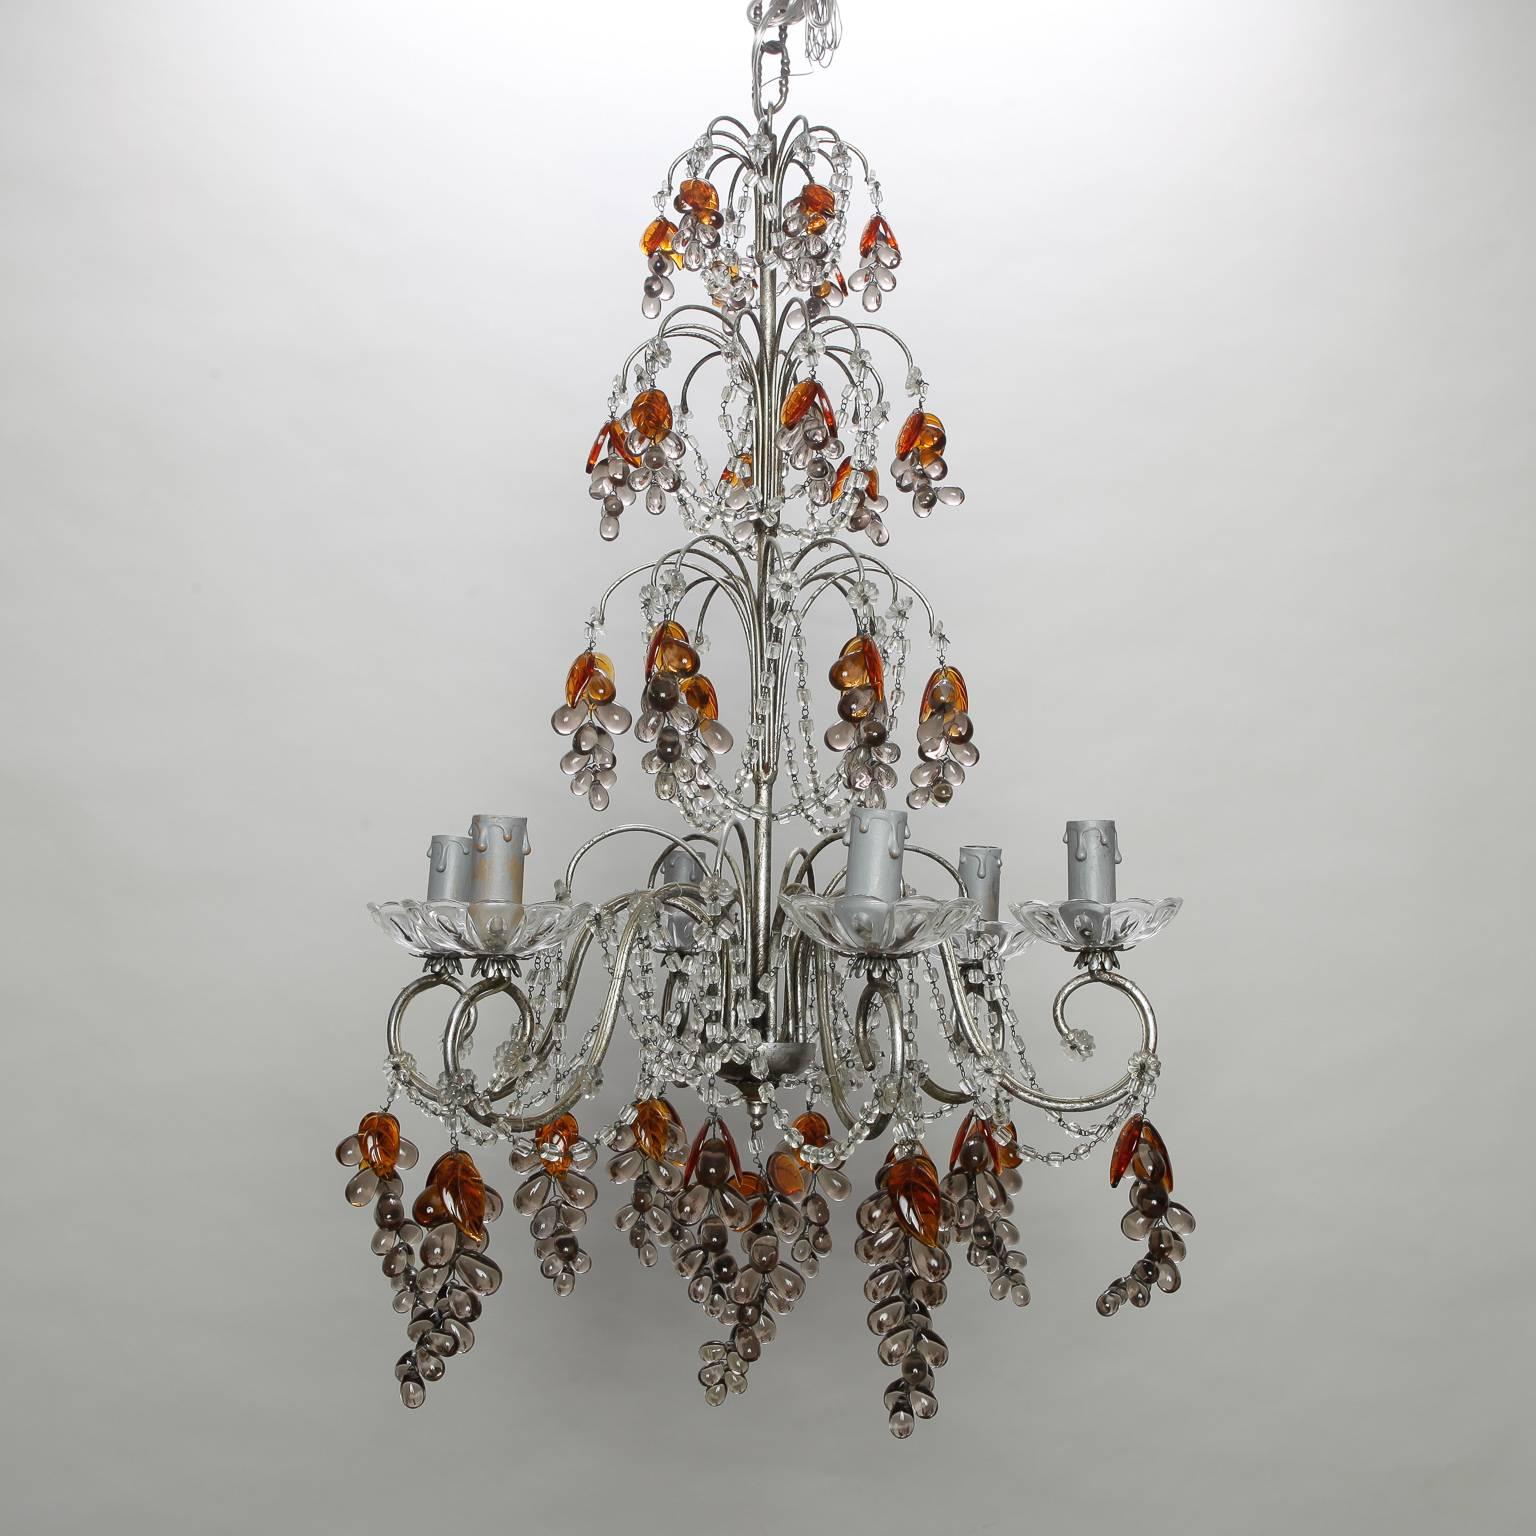 Six-Light Chandelier with Crystal Beads and Glass Grapes In Good Condition For Sale In Troy, MI